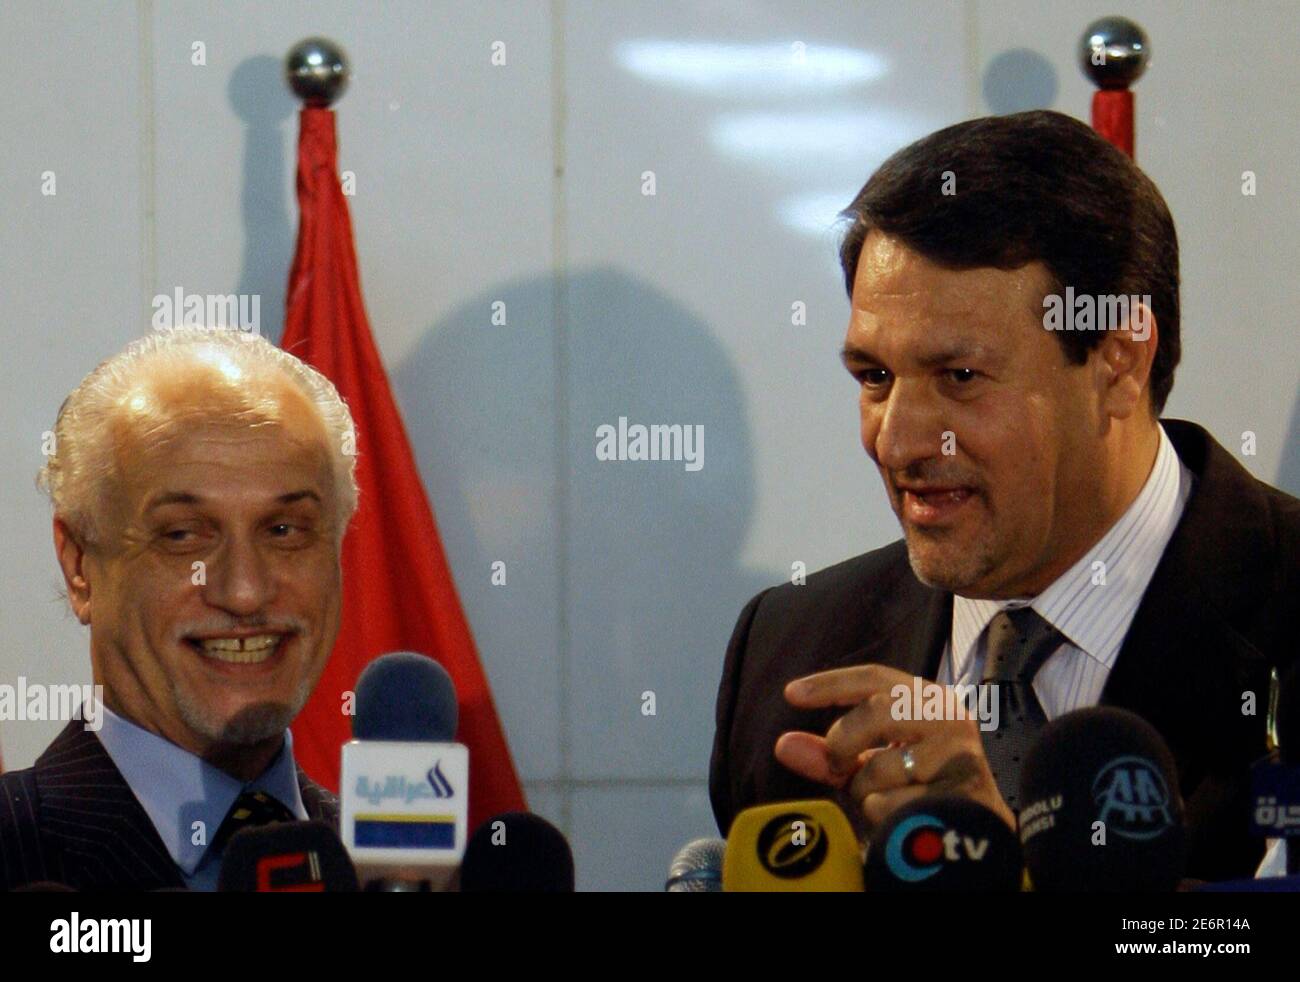 Iraq's Oil Minister Hussein al-Shahristani (L) and Iraqi government spokesman Ali al-Dabbagh hold a joint news conference in Baghdad June 10, 2009. The Baghdad government will not pay firms that signed independent deals with Iraq's Kurdish region for the development of the Taq Taq and Tawke oilfields, Shahristani said on Wednesday. REUTERS/Atef Hassan (IRAQ BUSINESS ENERGY POLITICS) Stock Photo